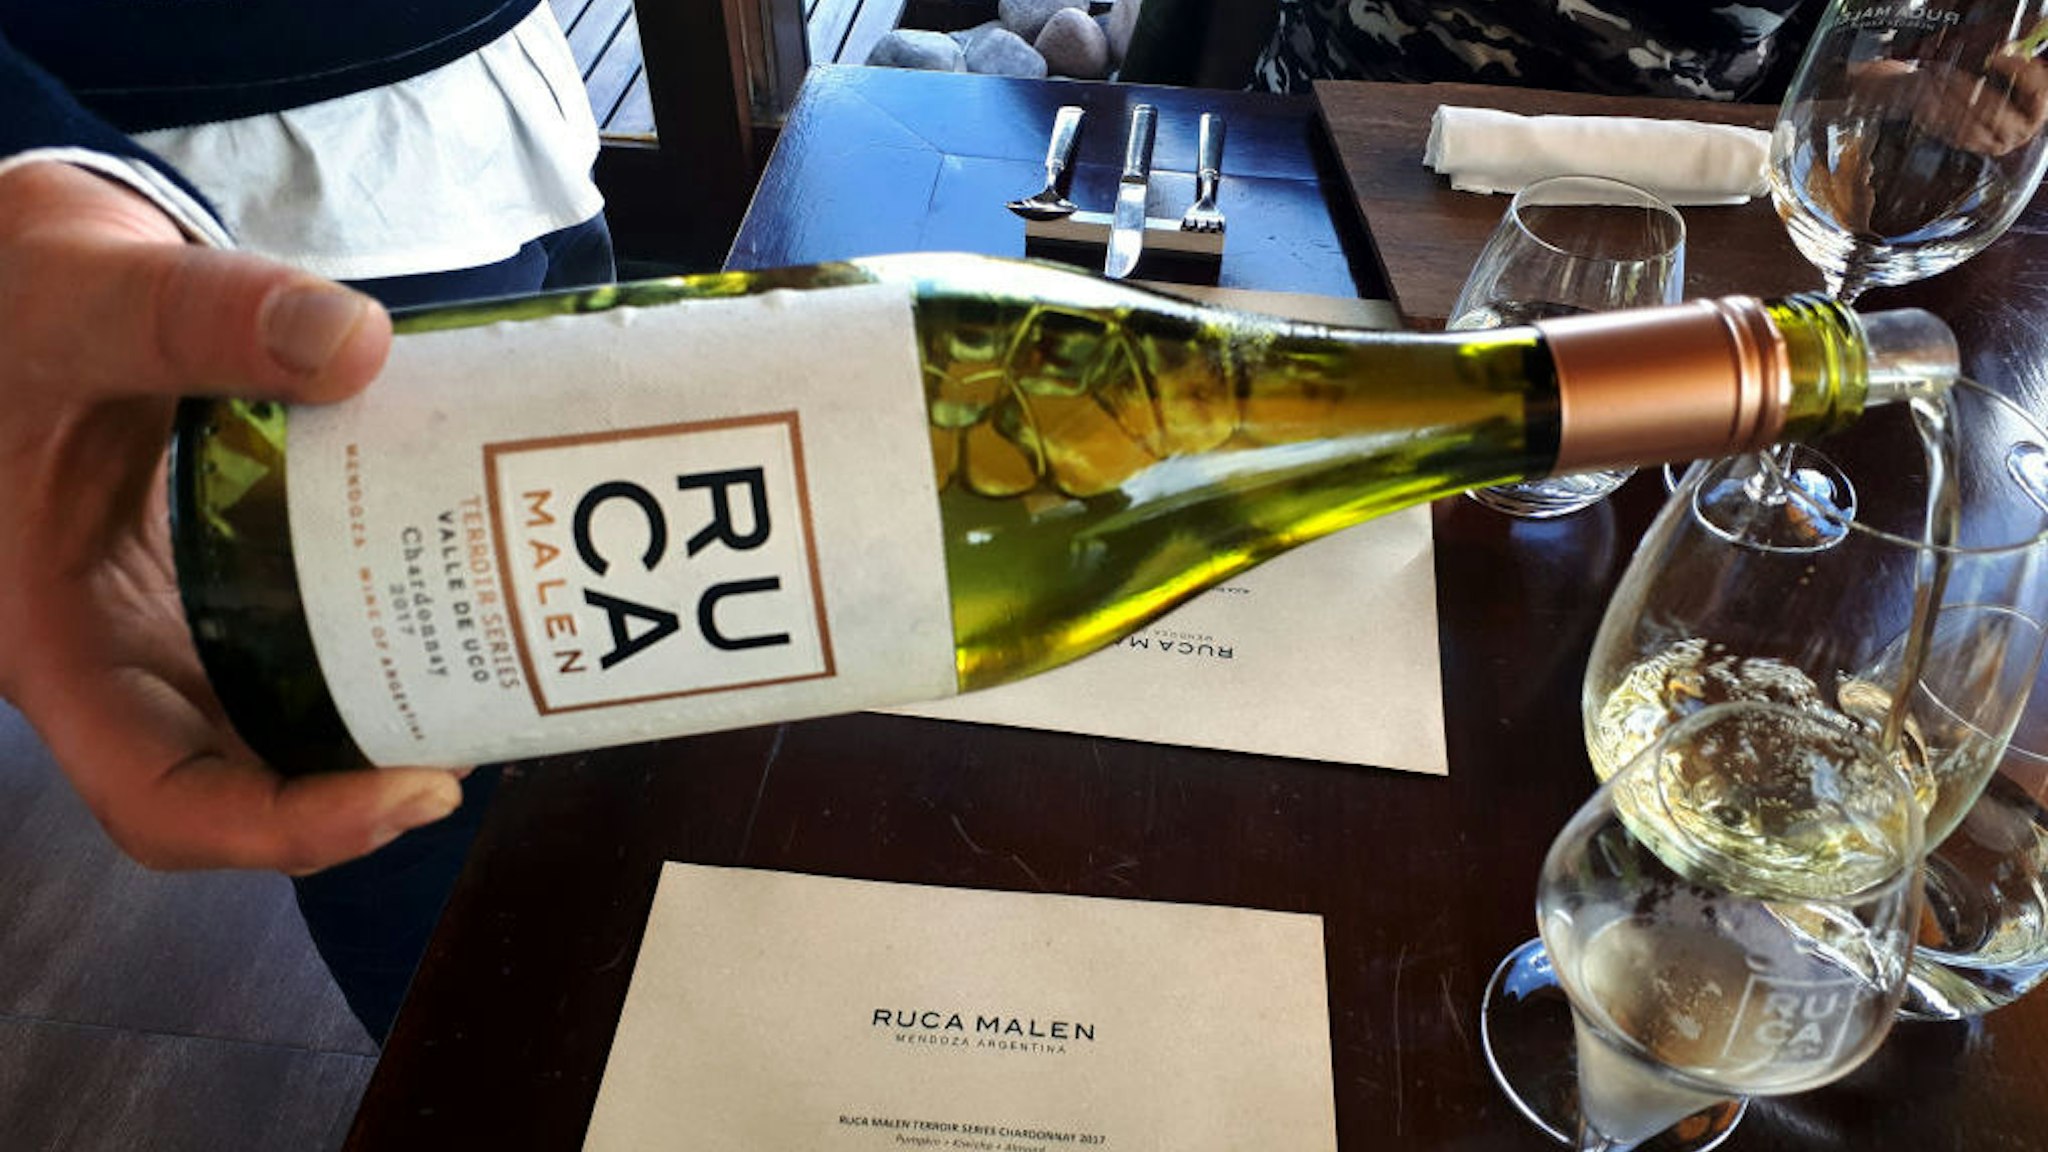 Bodega Ruca Malen's Terroir series Chardonnay 2017 vintage is served at the start of a seven-course tasting menu at the winery's restaurant on March 28, 2019 in the Luj√°n de Cuyo district of Mendoza province, Argentina. Ruca Malen winery was established in 1998 and opened its on-site gourmet restaurant in 2004, surrounded by vineyards and with a view of the nearby Andes mountains. Under head chef Lucas Bustos, the restaurant's menu is dedicated to locally sourced produce and pairs every course with a different Ruca Malen wine. According to government data, increasing numbers of foreign tourists are flocking to the iconic wine-producing province of Mendoza and its award-winning wineries attracted by a cheaper devalued Peso and acclaimed wines at bargain prices in the wake of Argentina's latest economic meltdown. (Photo by David Silverman/Getty Images)